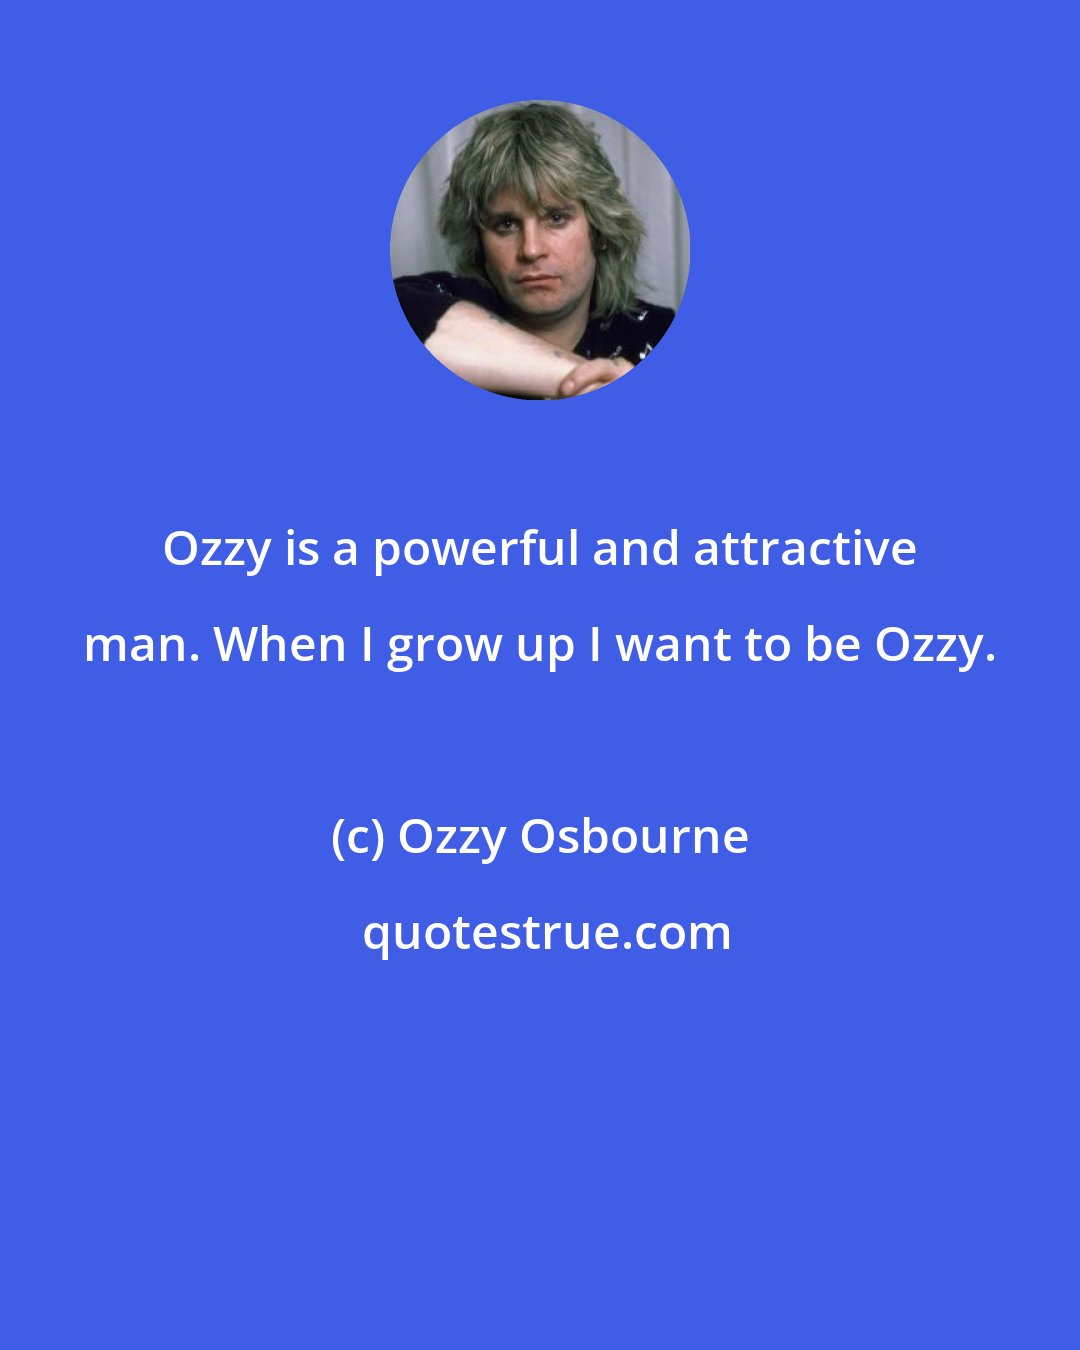 Ozzy Osbourne: Ozzy is a powerful and attractive man. When I grow up I want to be Ozzy.